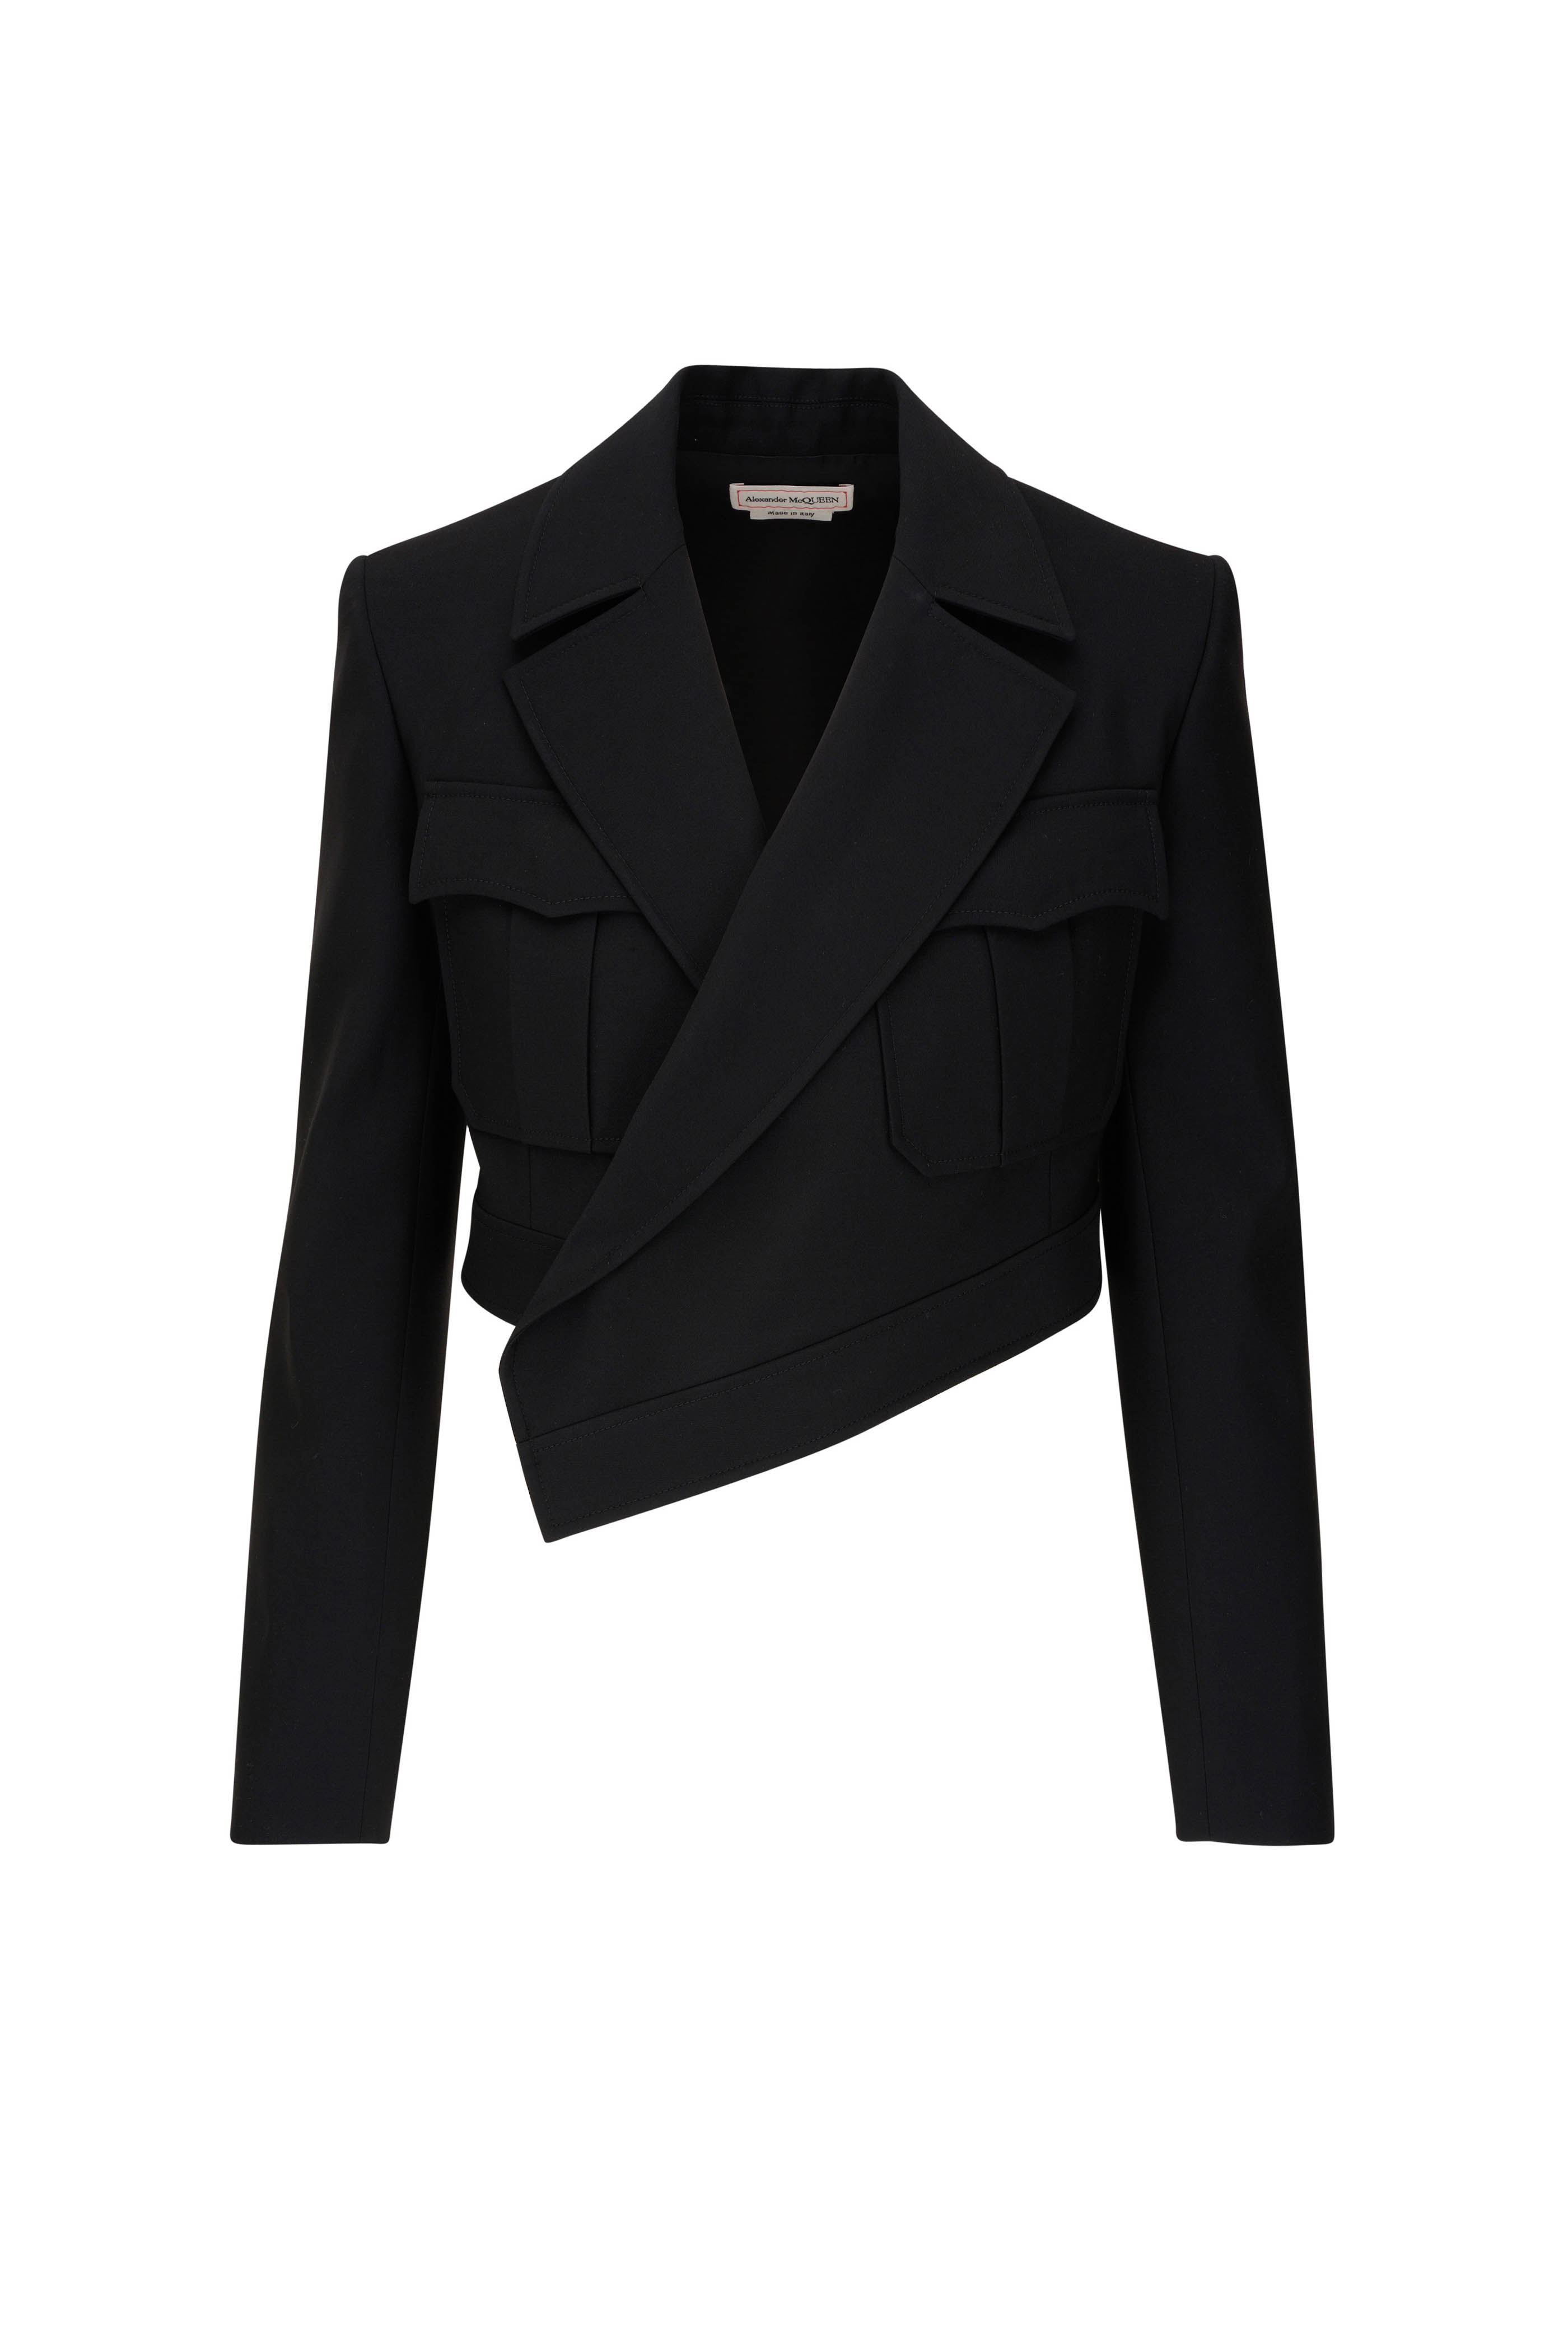 Alexander McQueen double-breasted Tailored Coat - Farfetch